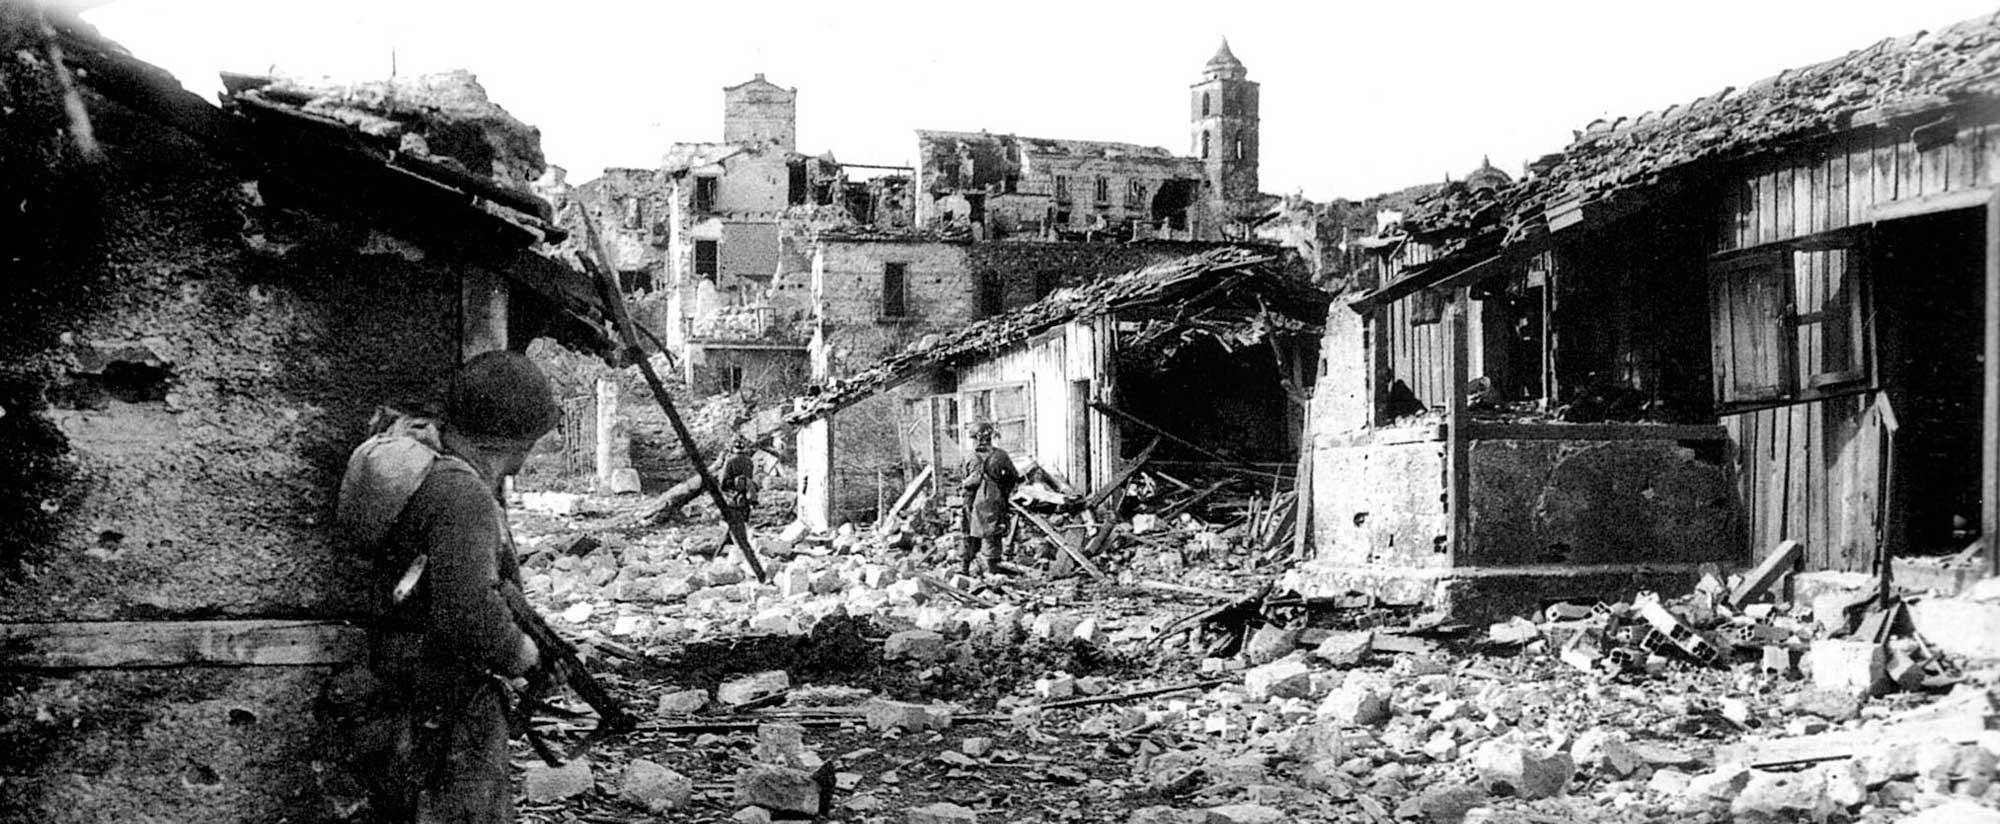 A Force combat patrol clears a ruined village near Radicosa.